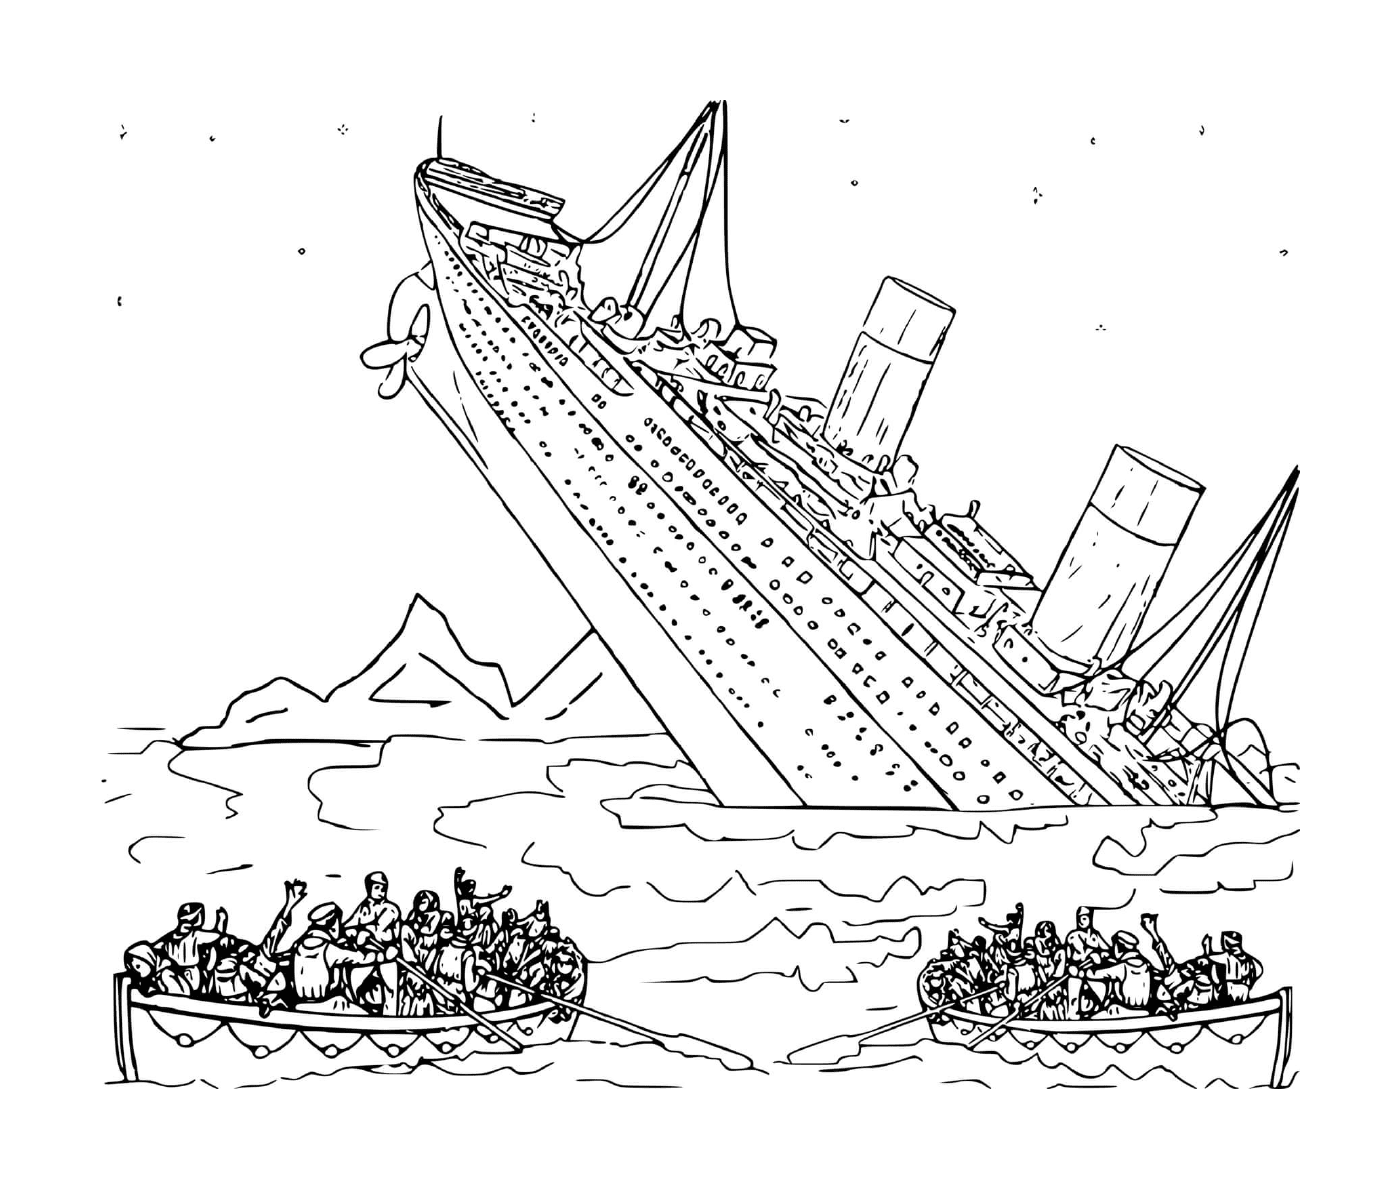  A boat in the water with people on board 